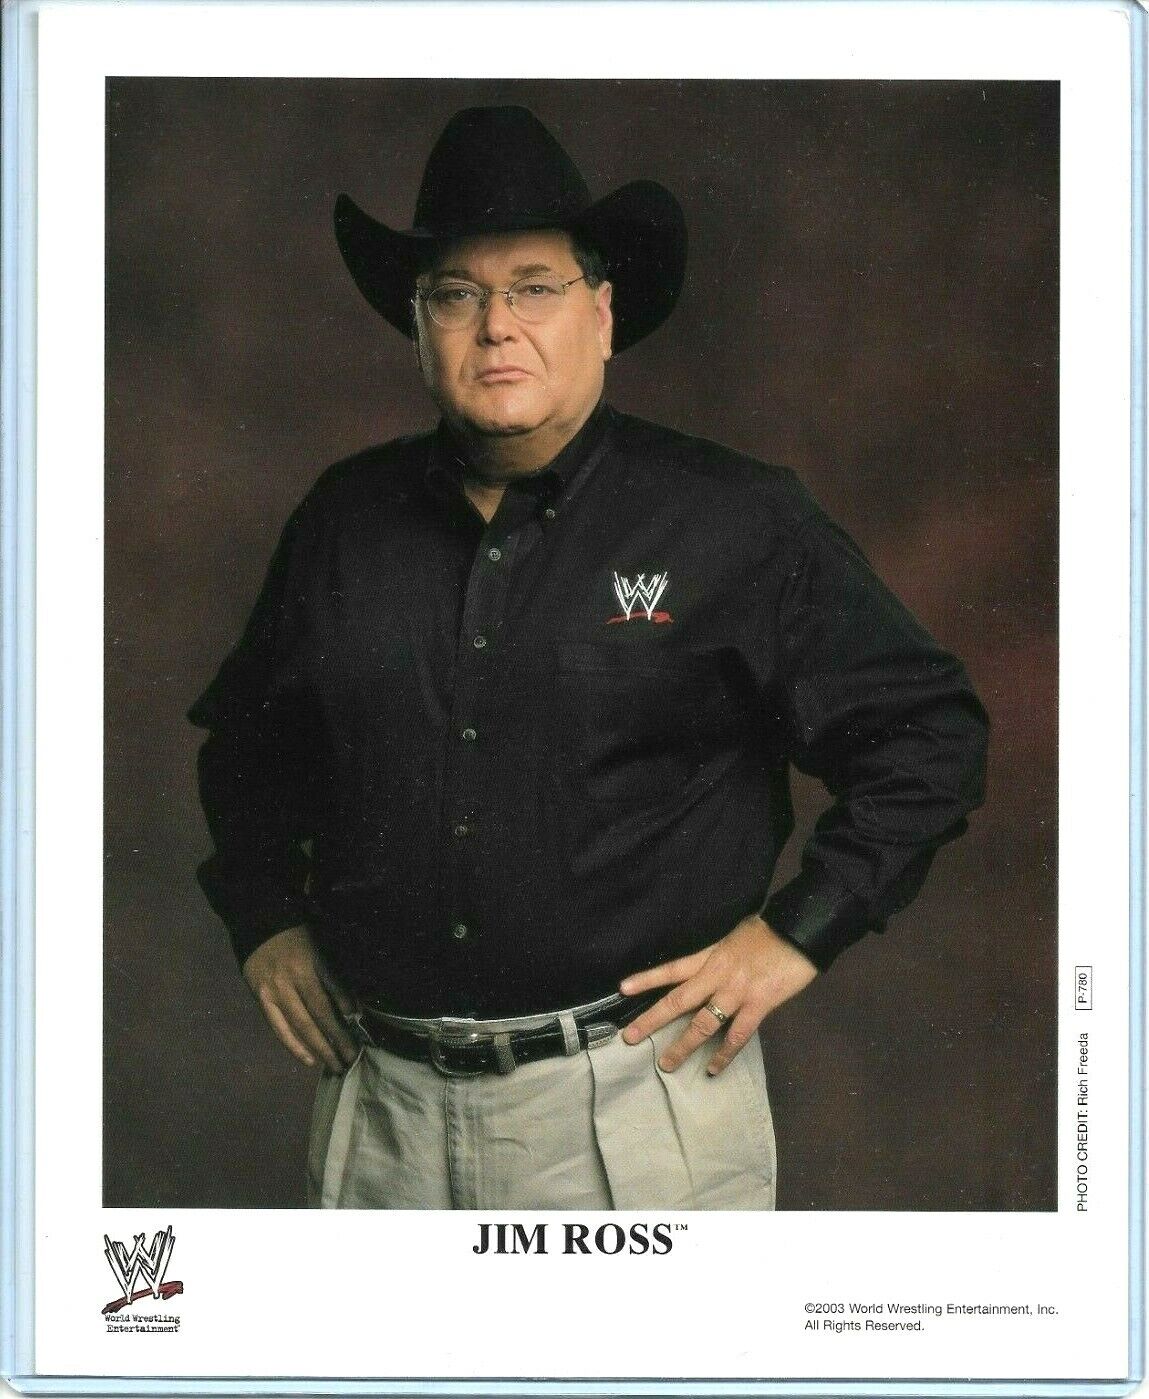 WWE JIM ROSS P-780 OFFICIAL LICENSED AUTHENTIC ORIGINAL 8X10 PROMO Photo Poster painting RARE